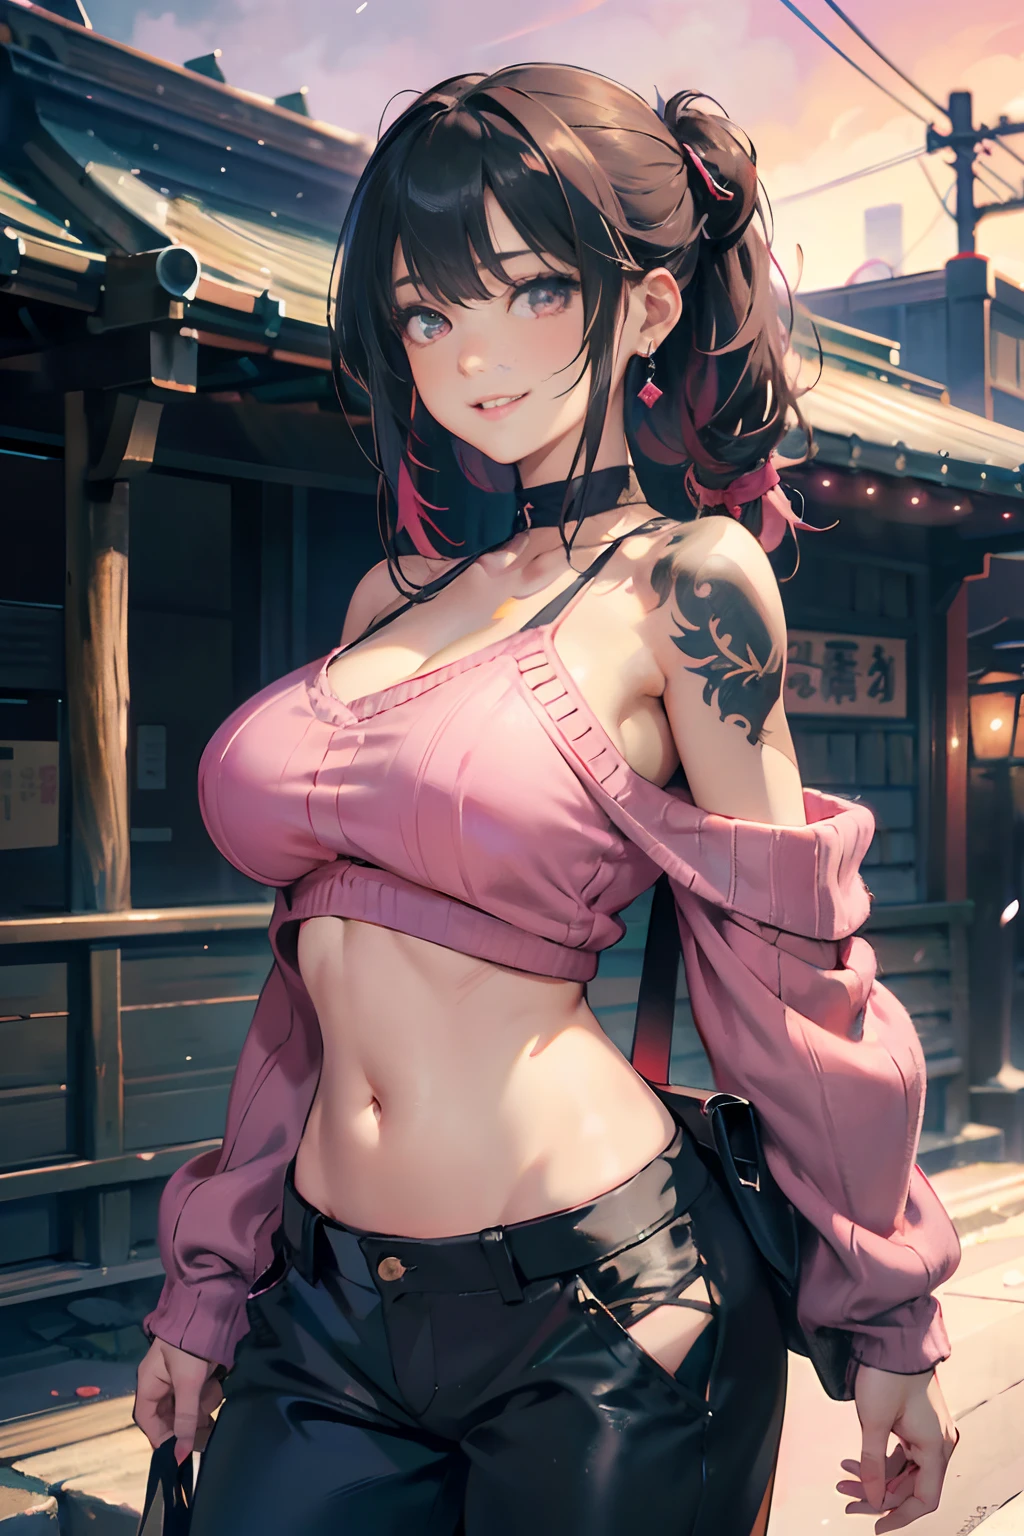 a 20 yo woman、Blackberry Hair、long twintail、Big smile、cleavage of the breast、Thighs at a glance、fishnet tights、＜Quality Improvement Prompt＞
＜Character appearance、Backgrounds and other prompts＞
BREAK (Pink Theme:1.4), (Vivid colors:1.3), (Pink Sweater:1.4), (long-sleeve:1.3), ((off shoulders, Navel, Stomach):1.3),
BREAK (Black theme:1.3), ((Black oversized pants, Black baggy pants):1.3), (Black Choker:1.2), (earrings:1.2), (lace-up boots:1.1),
＜expressioness、illuminating、Other Prompts＞(hi-top fade:1.3)、dark themed、Muted Tones、Subdued Color、highly contrast、(natural skin textures、Hyper-Realism、Soft light、sharp) (masutepiece, of the highest quality, Best Quality, Official art, Beautiful and aesthetic: 1.2), (1girl in: 1.3), Very detailed, (Fractal Art: 1.1), (Color: 1.1) (Flowers: 1.3), (By Yuko Higuchi:1.4), Yuko Higuchi,(posted by Yow:1.2),(linear art),Line drawing,Pen drawing,Zentangle,(Tattoo patterns:1.2),(complex lines),(masutepiece),(Best Quality:1.1), (Ultra-detailed),Best Illustration,finely detail,hand-drawn high quality,High contrast,(Clean lines:1.3),ligne claire,(Portrait),(very closeup:1.1),1 girl,Solo,The girl is wrapped in snow,(Intricate details:1.3),(Detailed background:1.2),(coloured background:1.1),sketch,Intricate details,High resolution，a moon，top-quality、8K、hight resolution、​masterpiece、(portlate:0.6)、A dark-haired、Middle hair、(grinning evily:1.3)、(Look at viewers:1.3)、(bokeh dof)、18year old、8K, masutepiece, (Photorealistic:1.5), Artistic portrait from behind ((Yakuza Girls) Wearing kimono), back tattoo, Revealing the tattoo on the back, (Dragon tattoo), Bare shoulders, huge-breasted,  Beautiful skin, Slim Fit Body, Cute face, nice appearance, look at viewr, Red hair in a bun with bangs, Foggy, Daylight, skyscapers, Clouds, Cozy and cool atmosphere, Dynamic lighting, natural, artistic，18-year-old girl Wahori skin, Yakuza, Japan Mafia, Background of Tokyo Red Light District, Realistic, Photoreal, masutepiece, Best Quality, Sexy with tattoos, Exotic